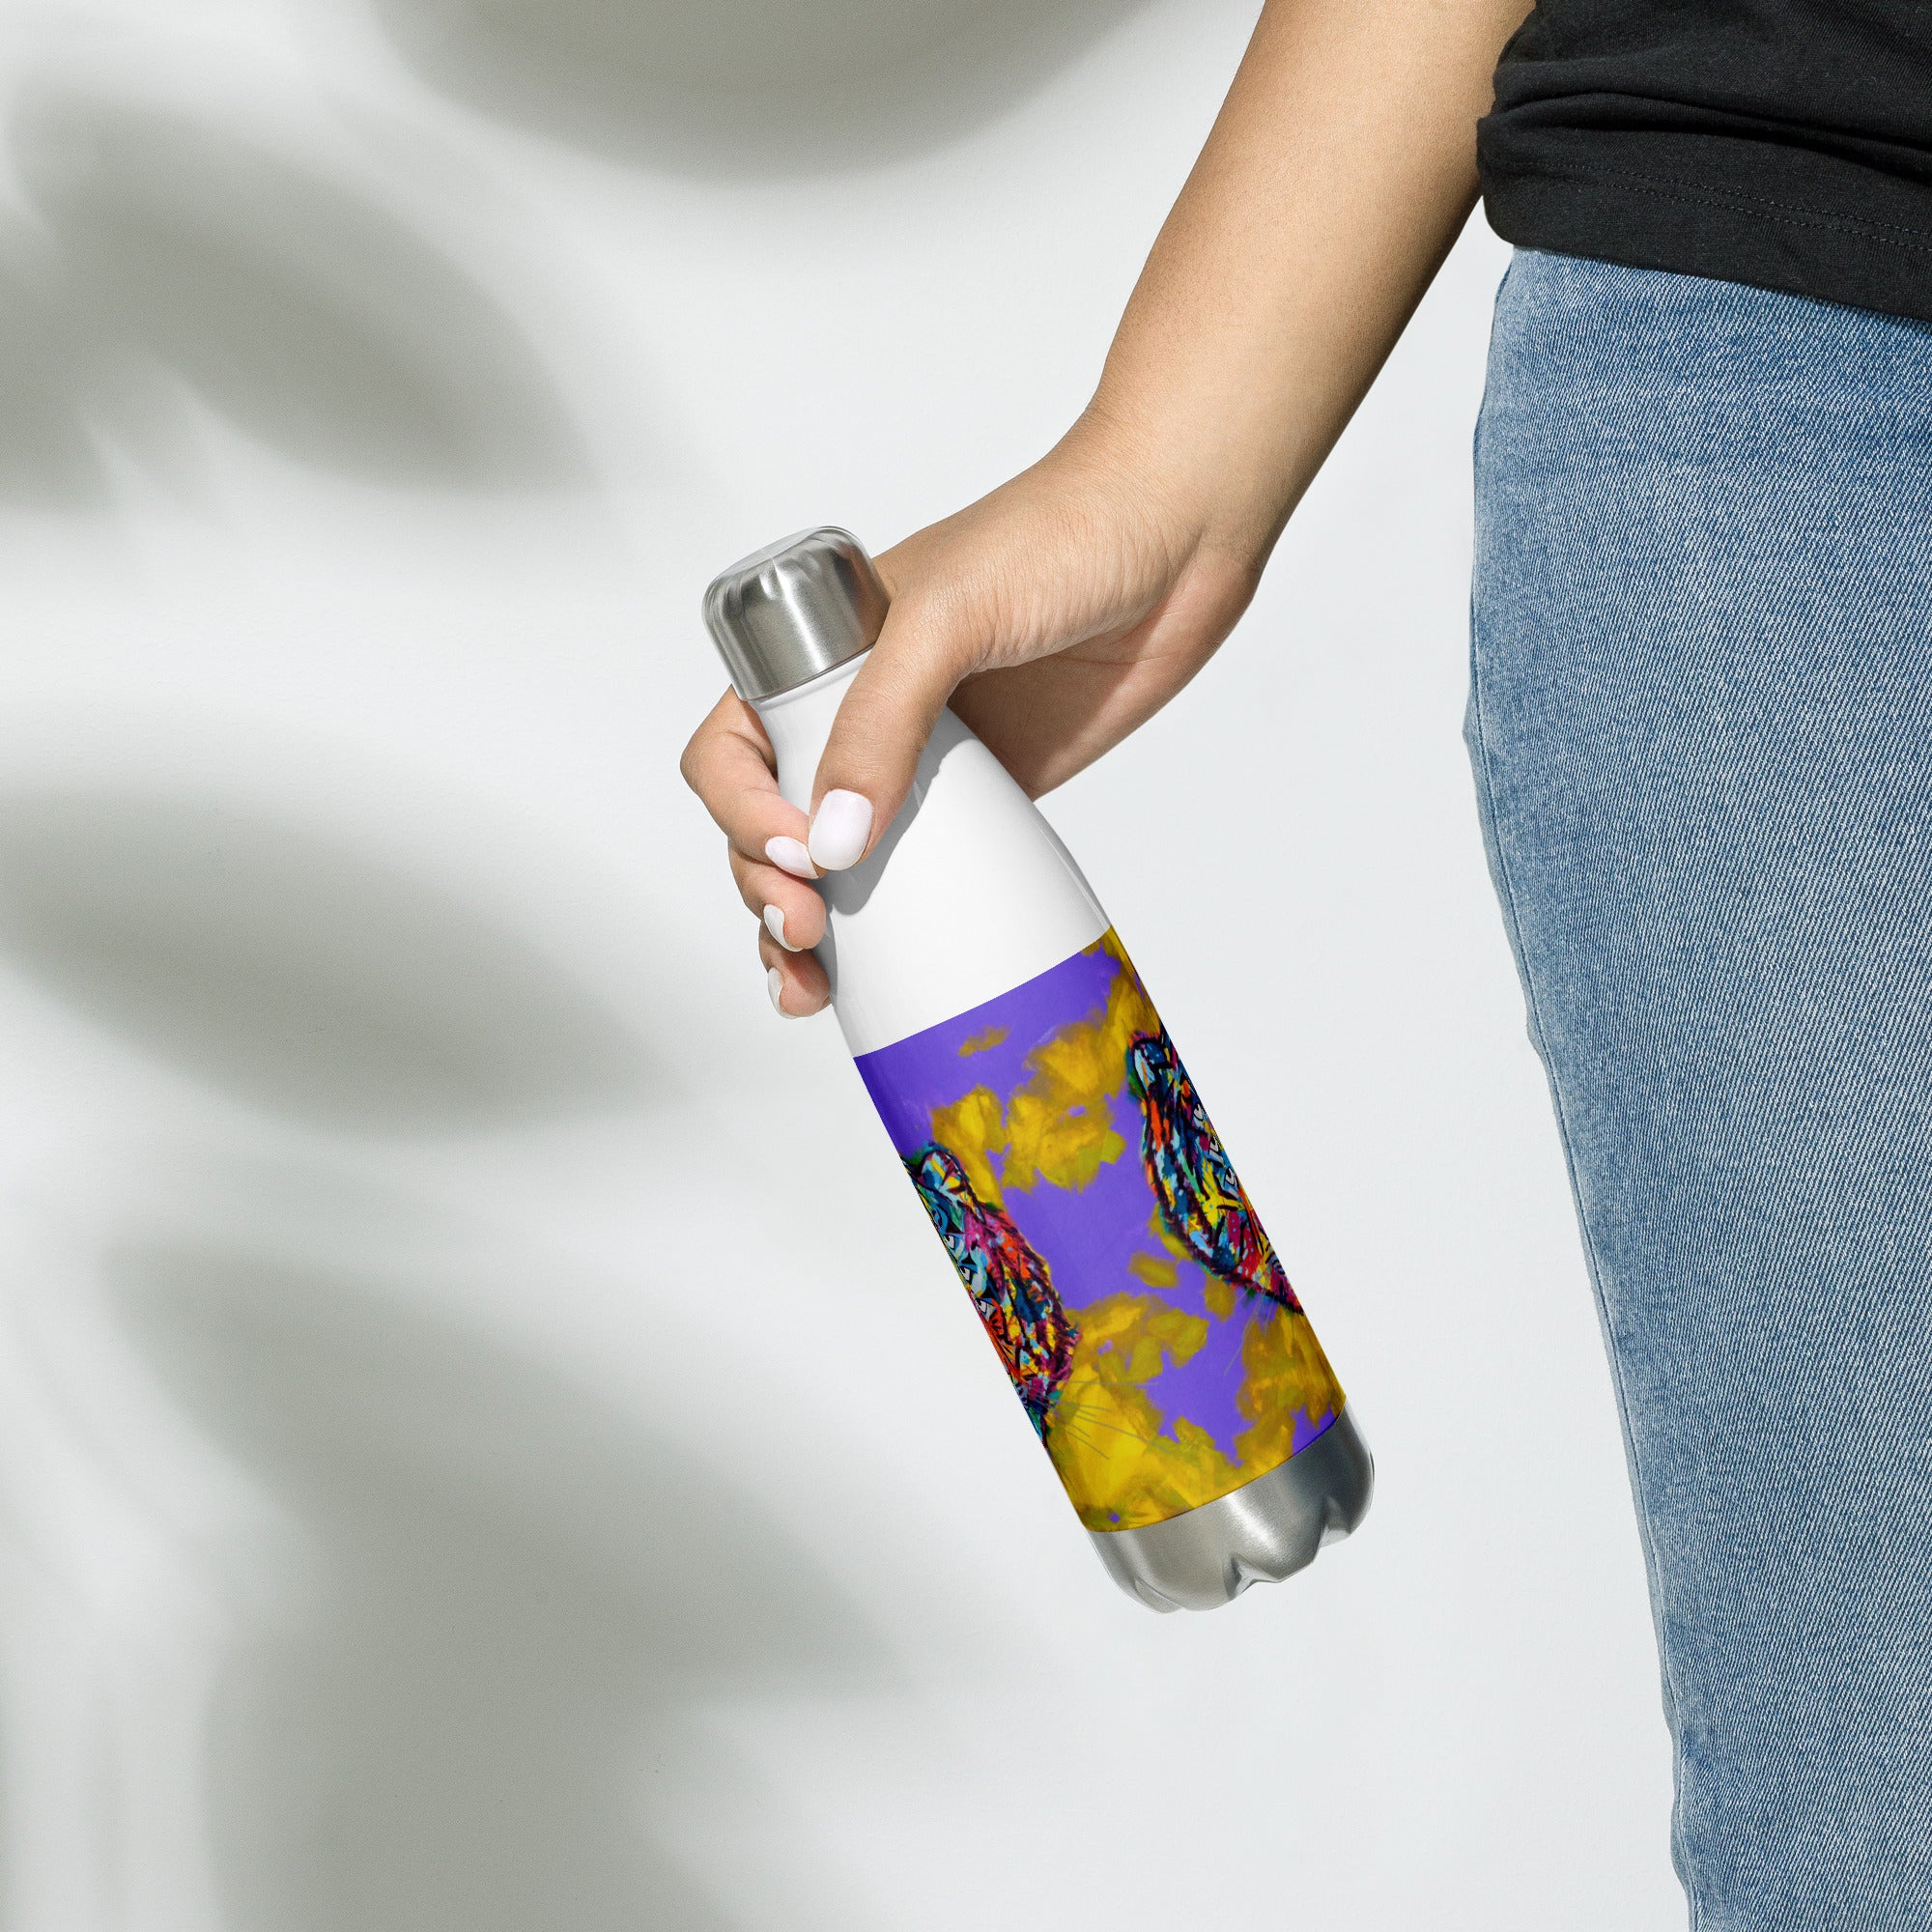 6 eyed rainbow tiger with purple and yellow Stainless Steel Water Bottle